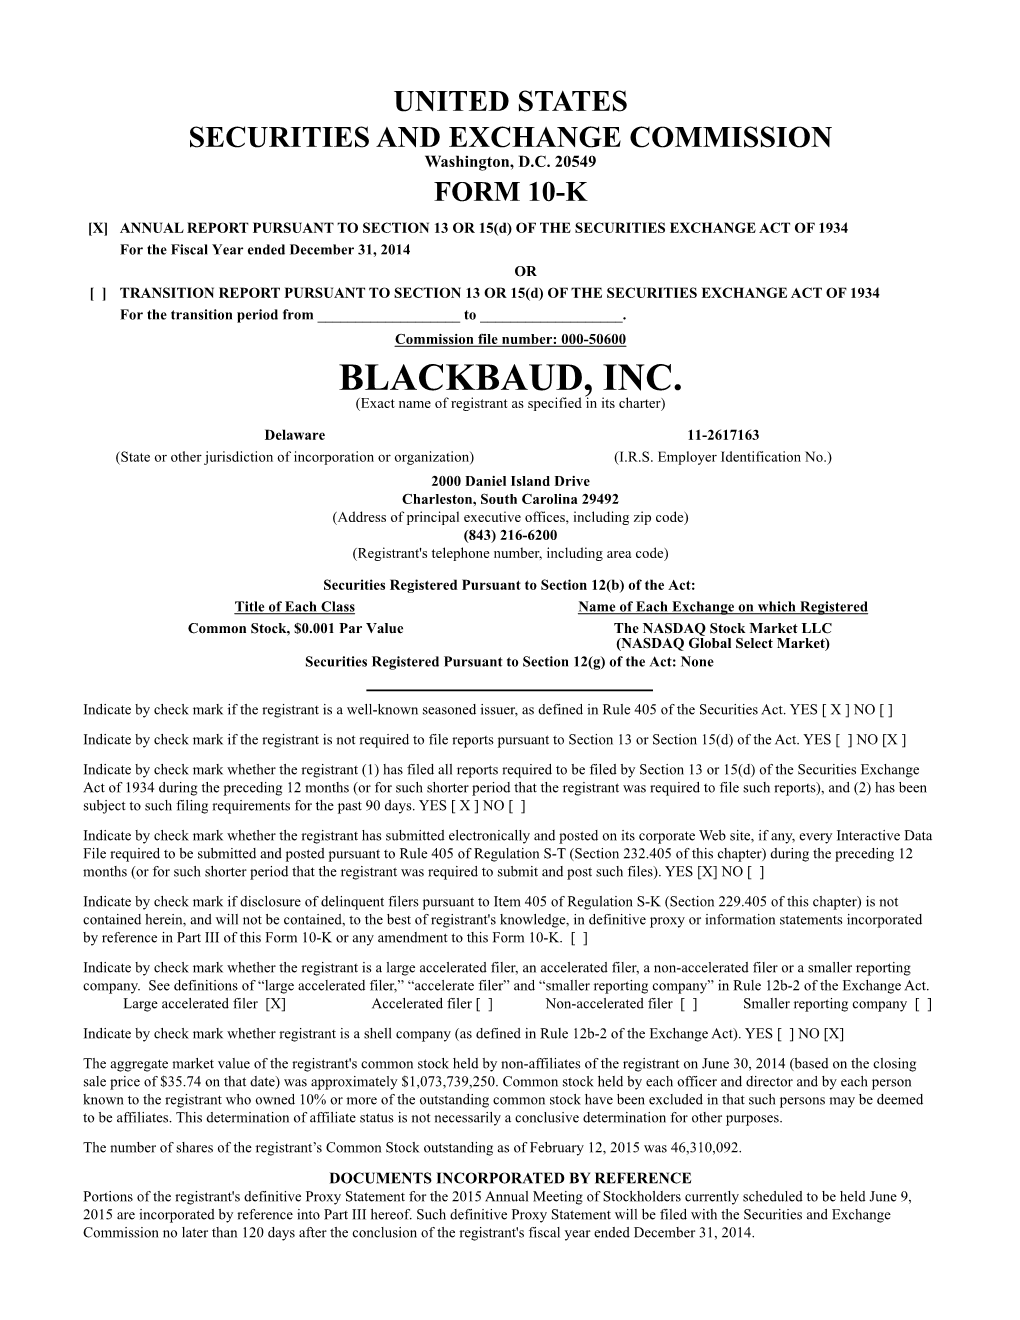 BLACKBAUD, INC. (Exact Name of Registrant As Specified in Its Charter)